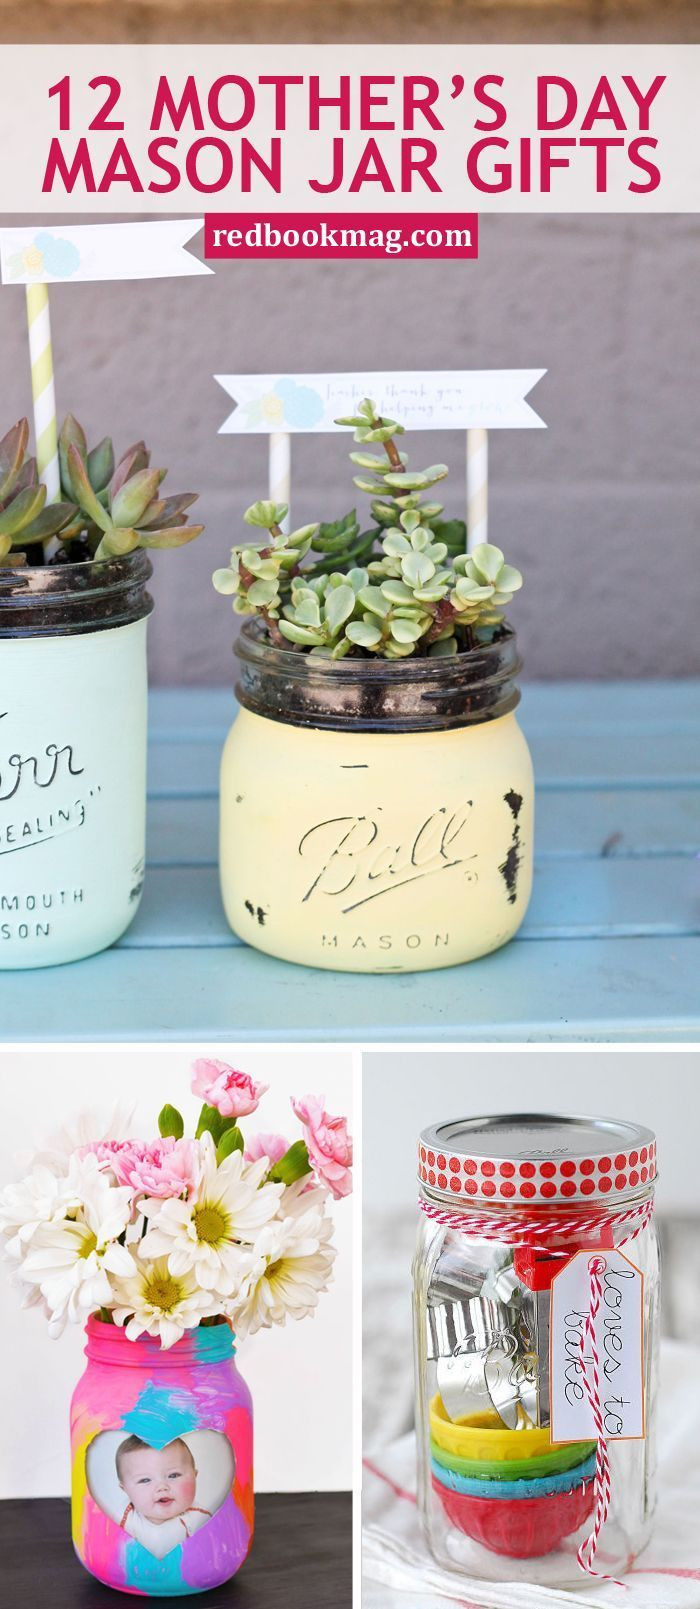 Mother'S Day Gift Ideas Homemade
 34 Mother s Day Gifts That Belong In a Mason Jar